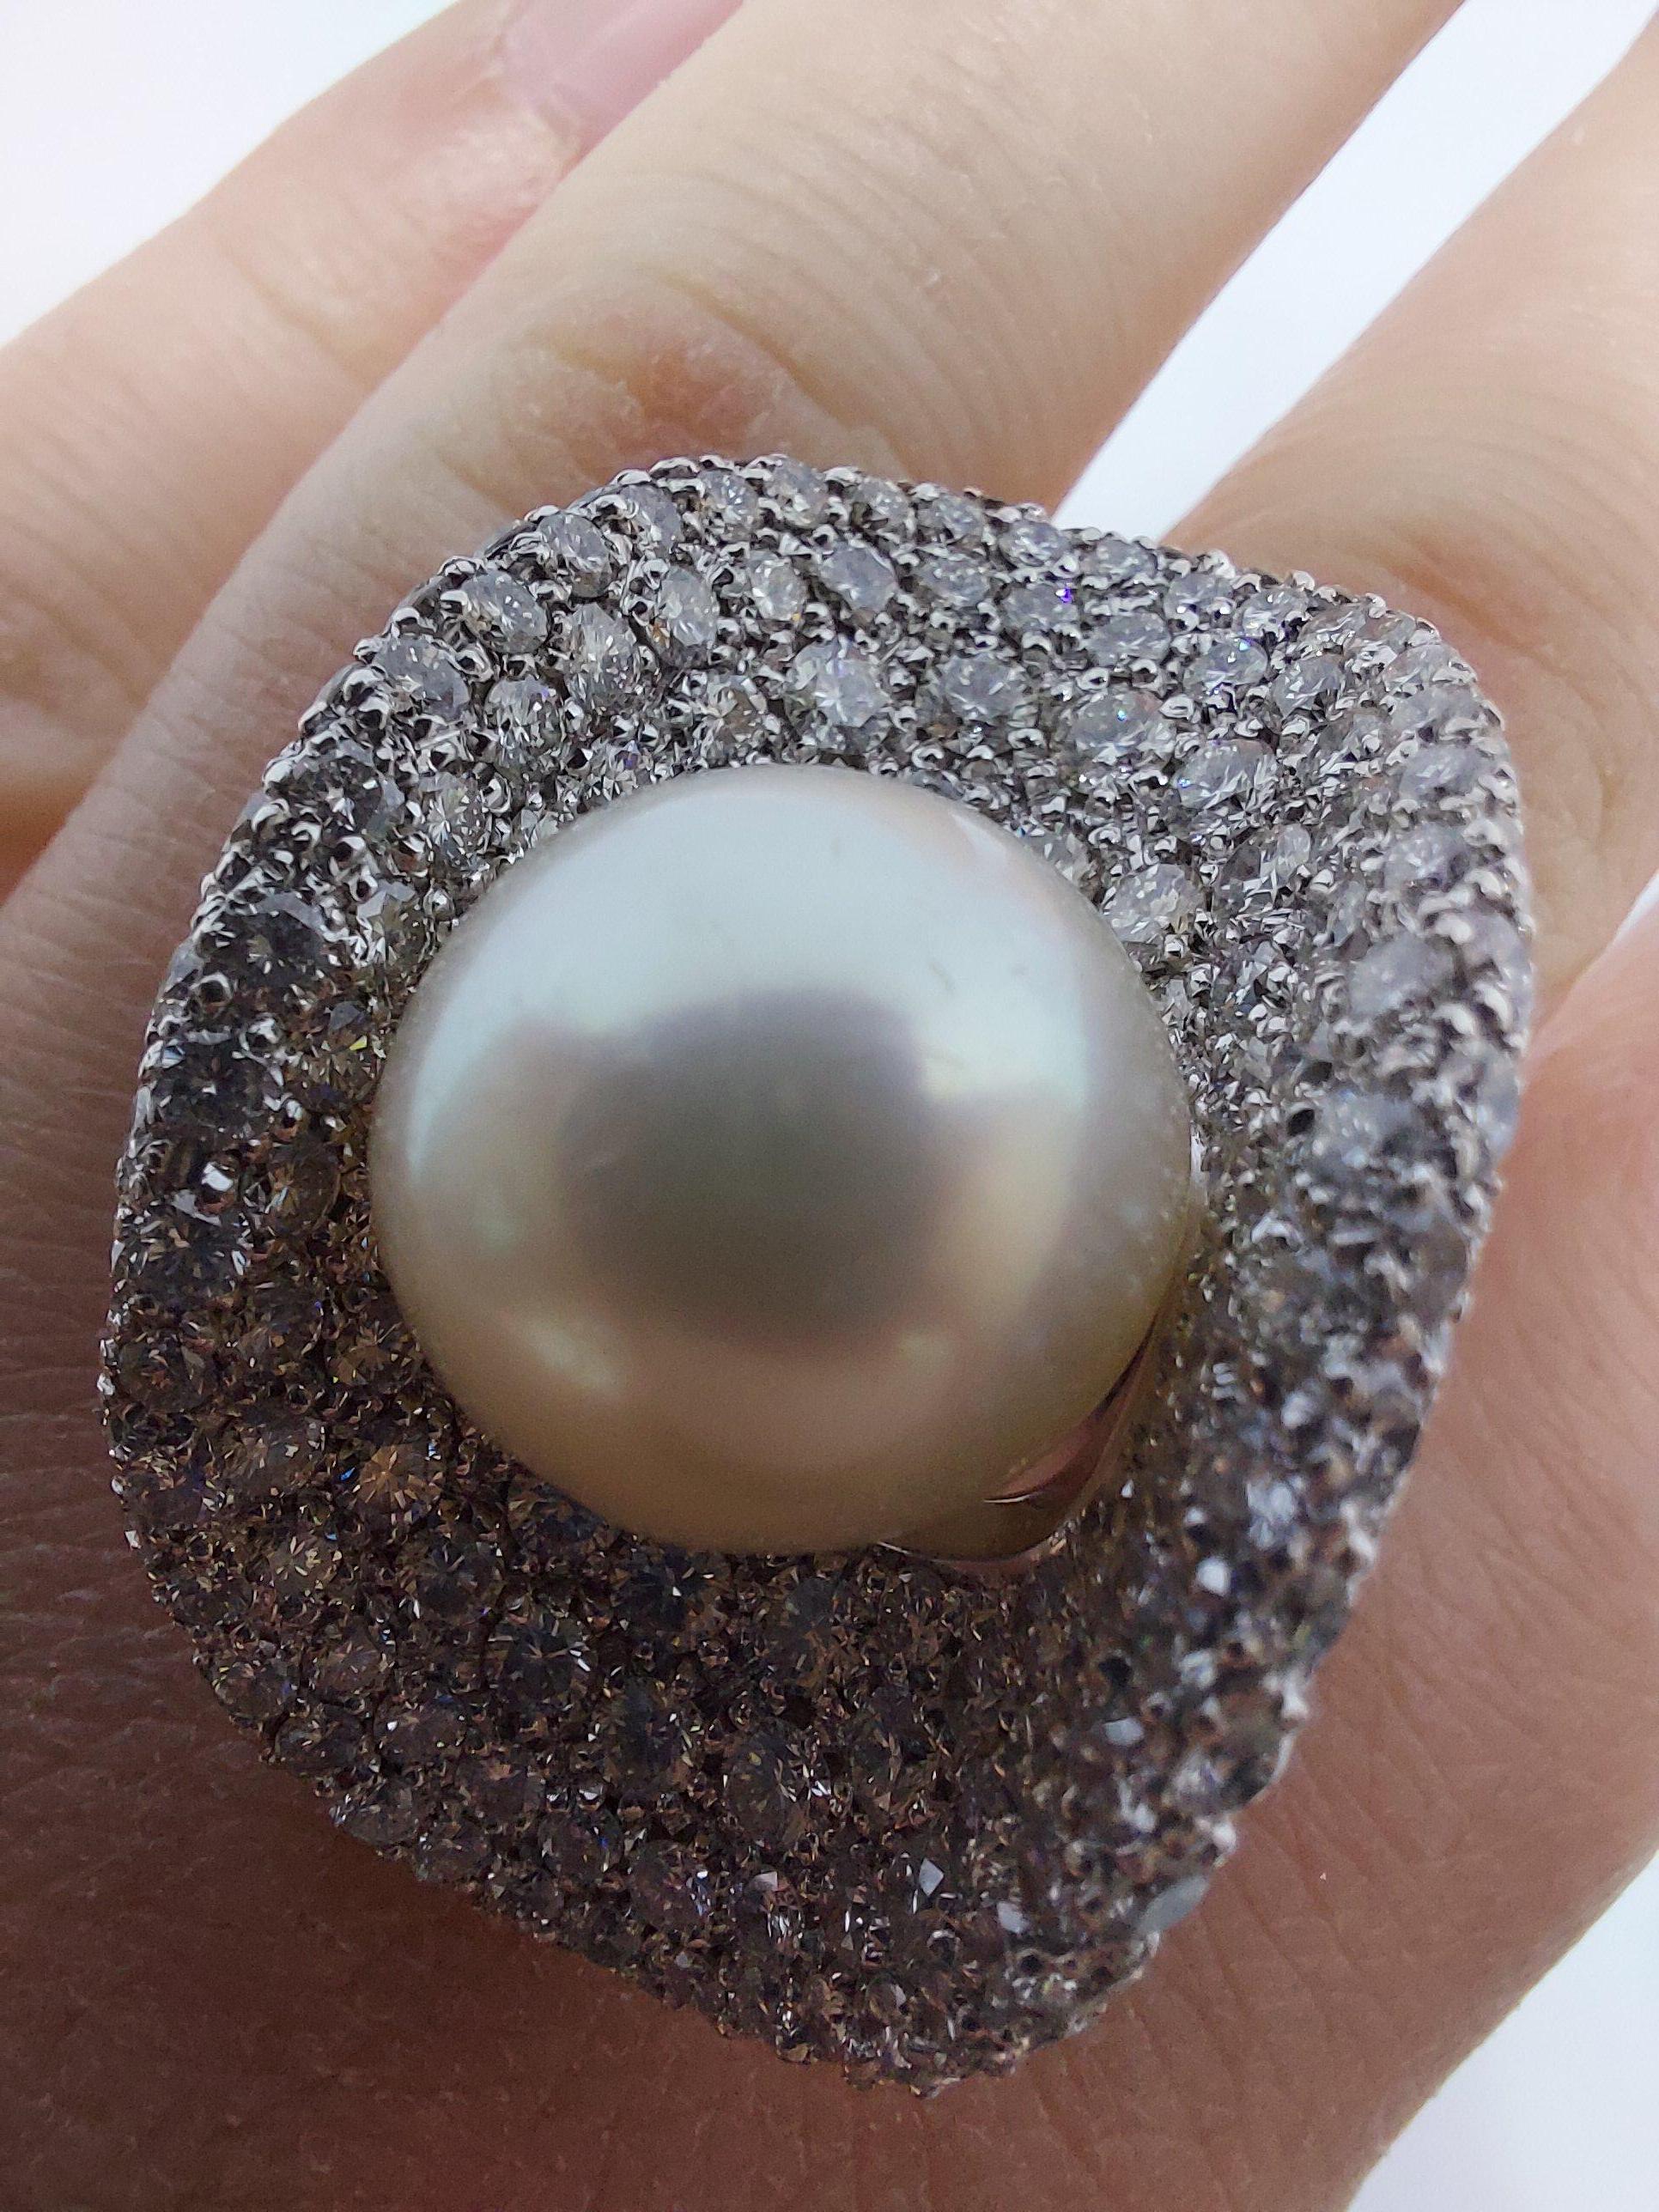 Magnificent 18 Karat White Gold Ring with 14.5 Carat Diamonds and a Big Pearl For Sale 8